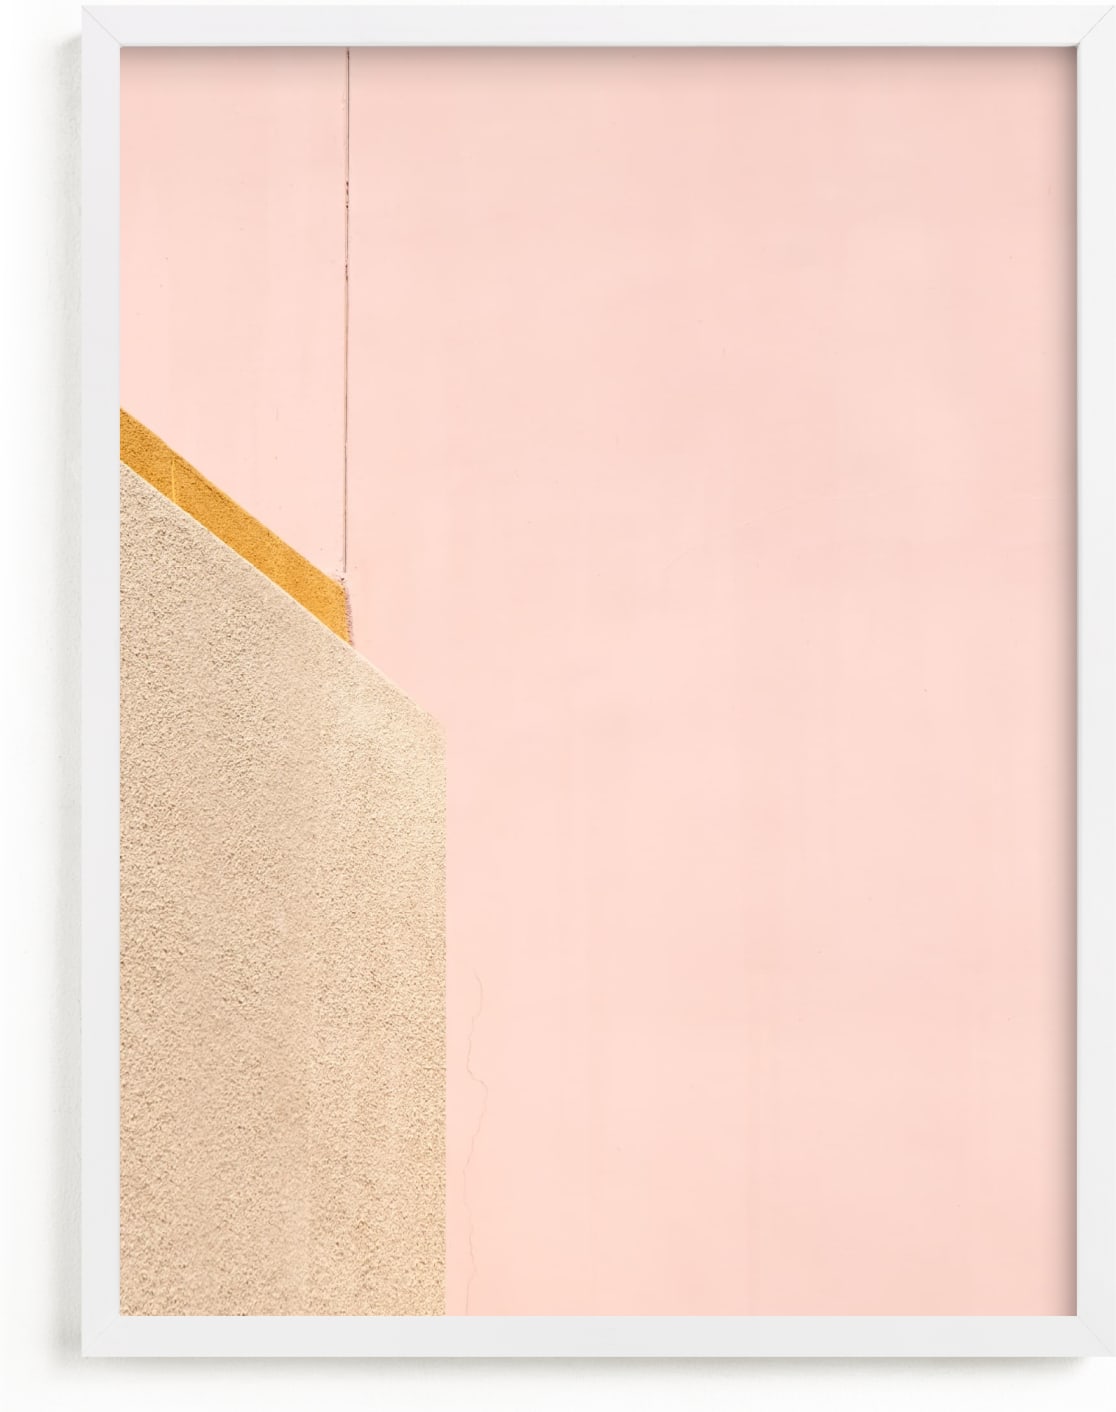 This is a pink art by Lisa Sundin called A Balanced Arch II.